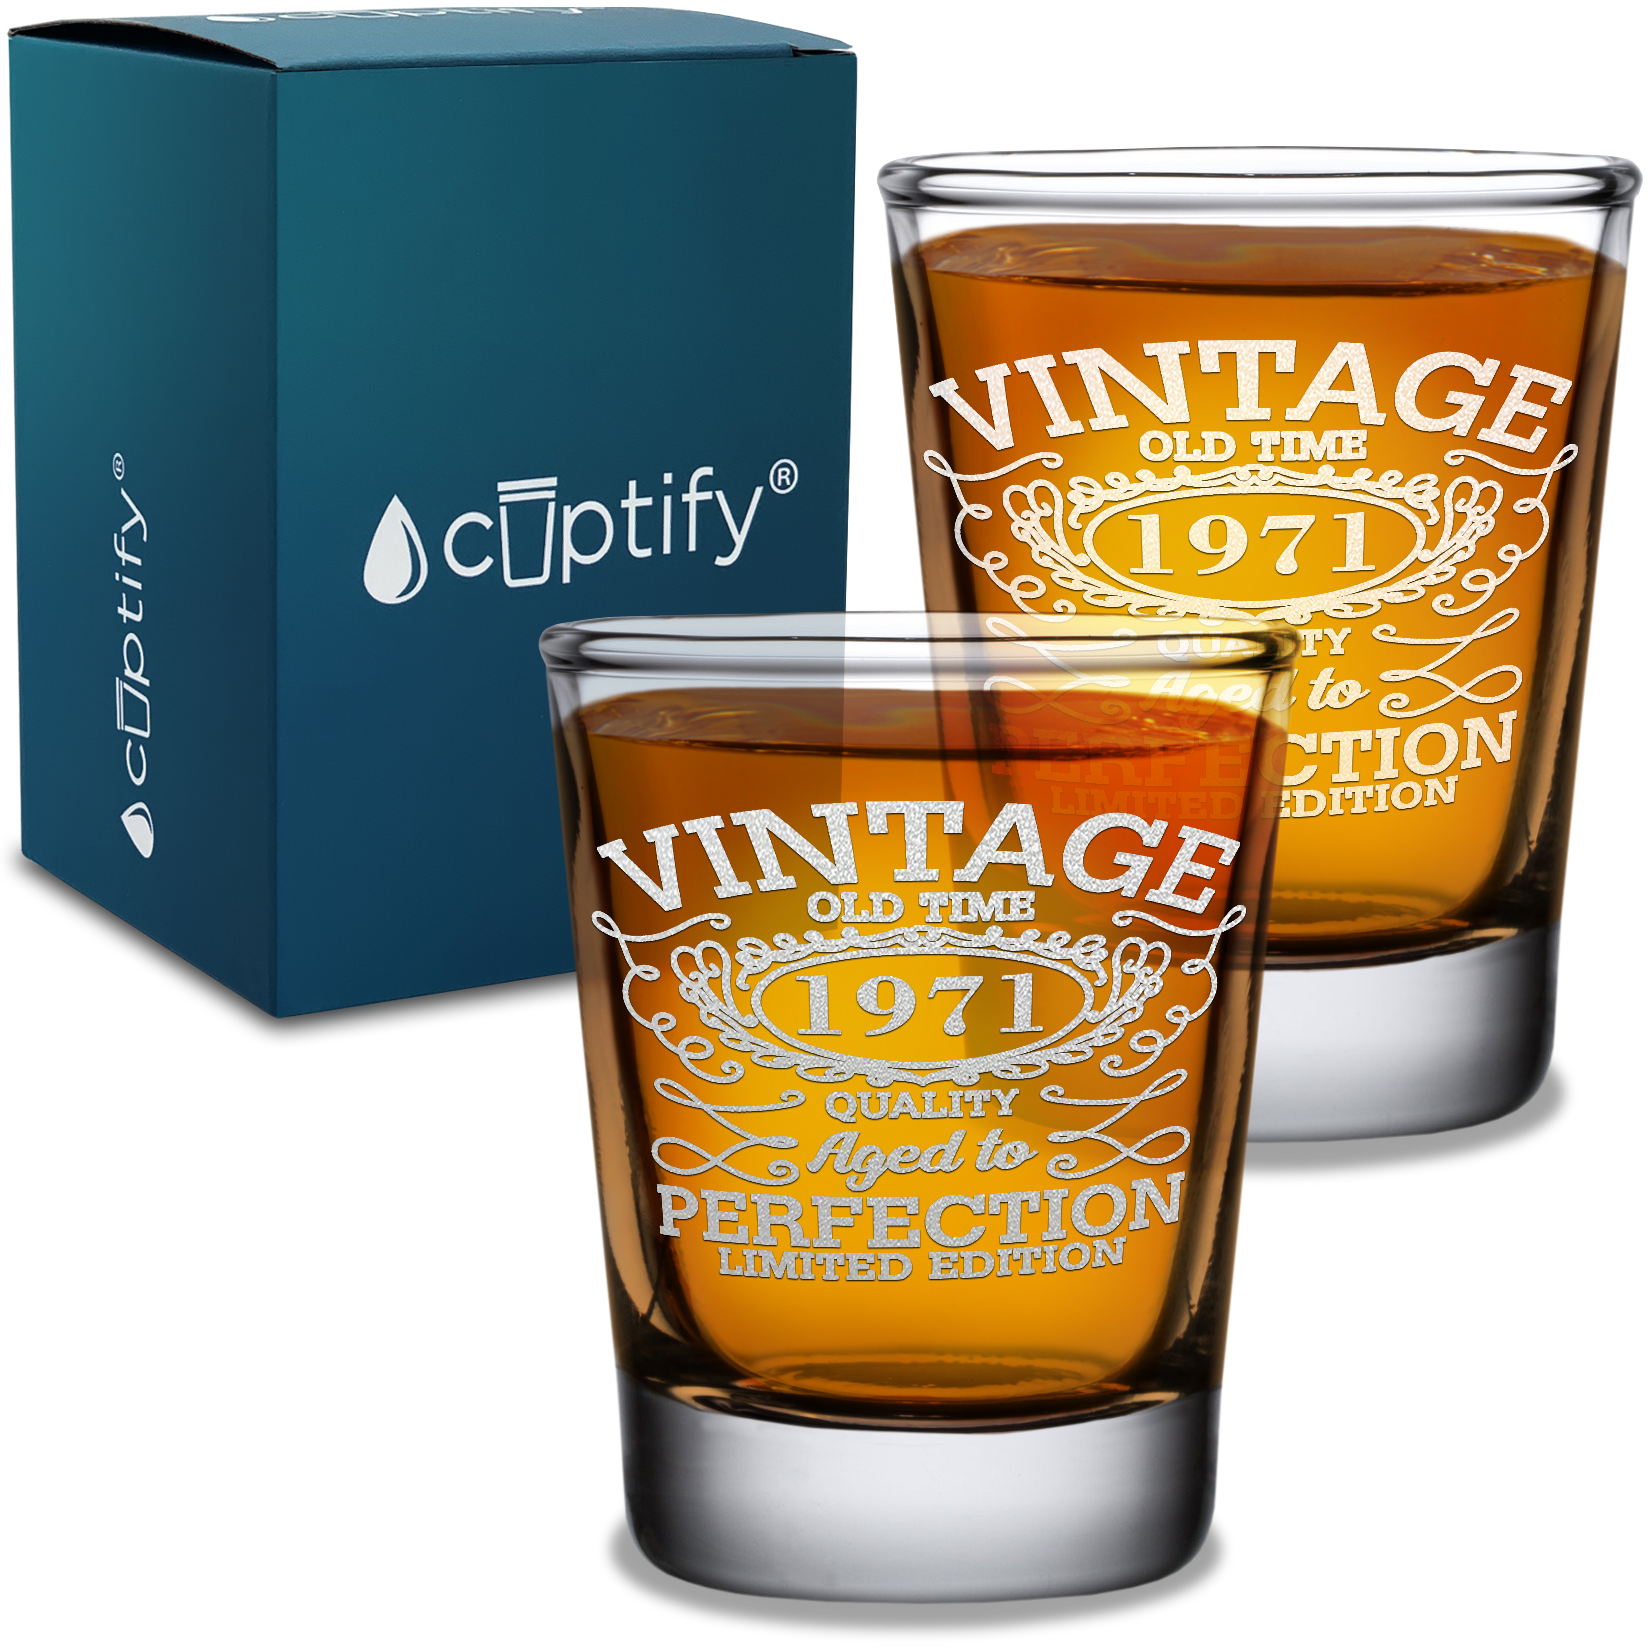 50th Birthday Vintage 50 Years Old Time 1971 Quality Laser Engraved 2oz Shot Glasses - Set of 2